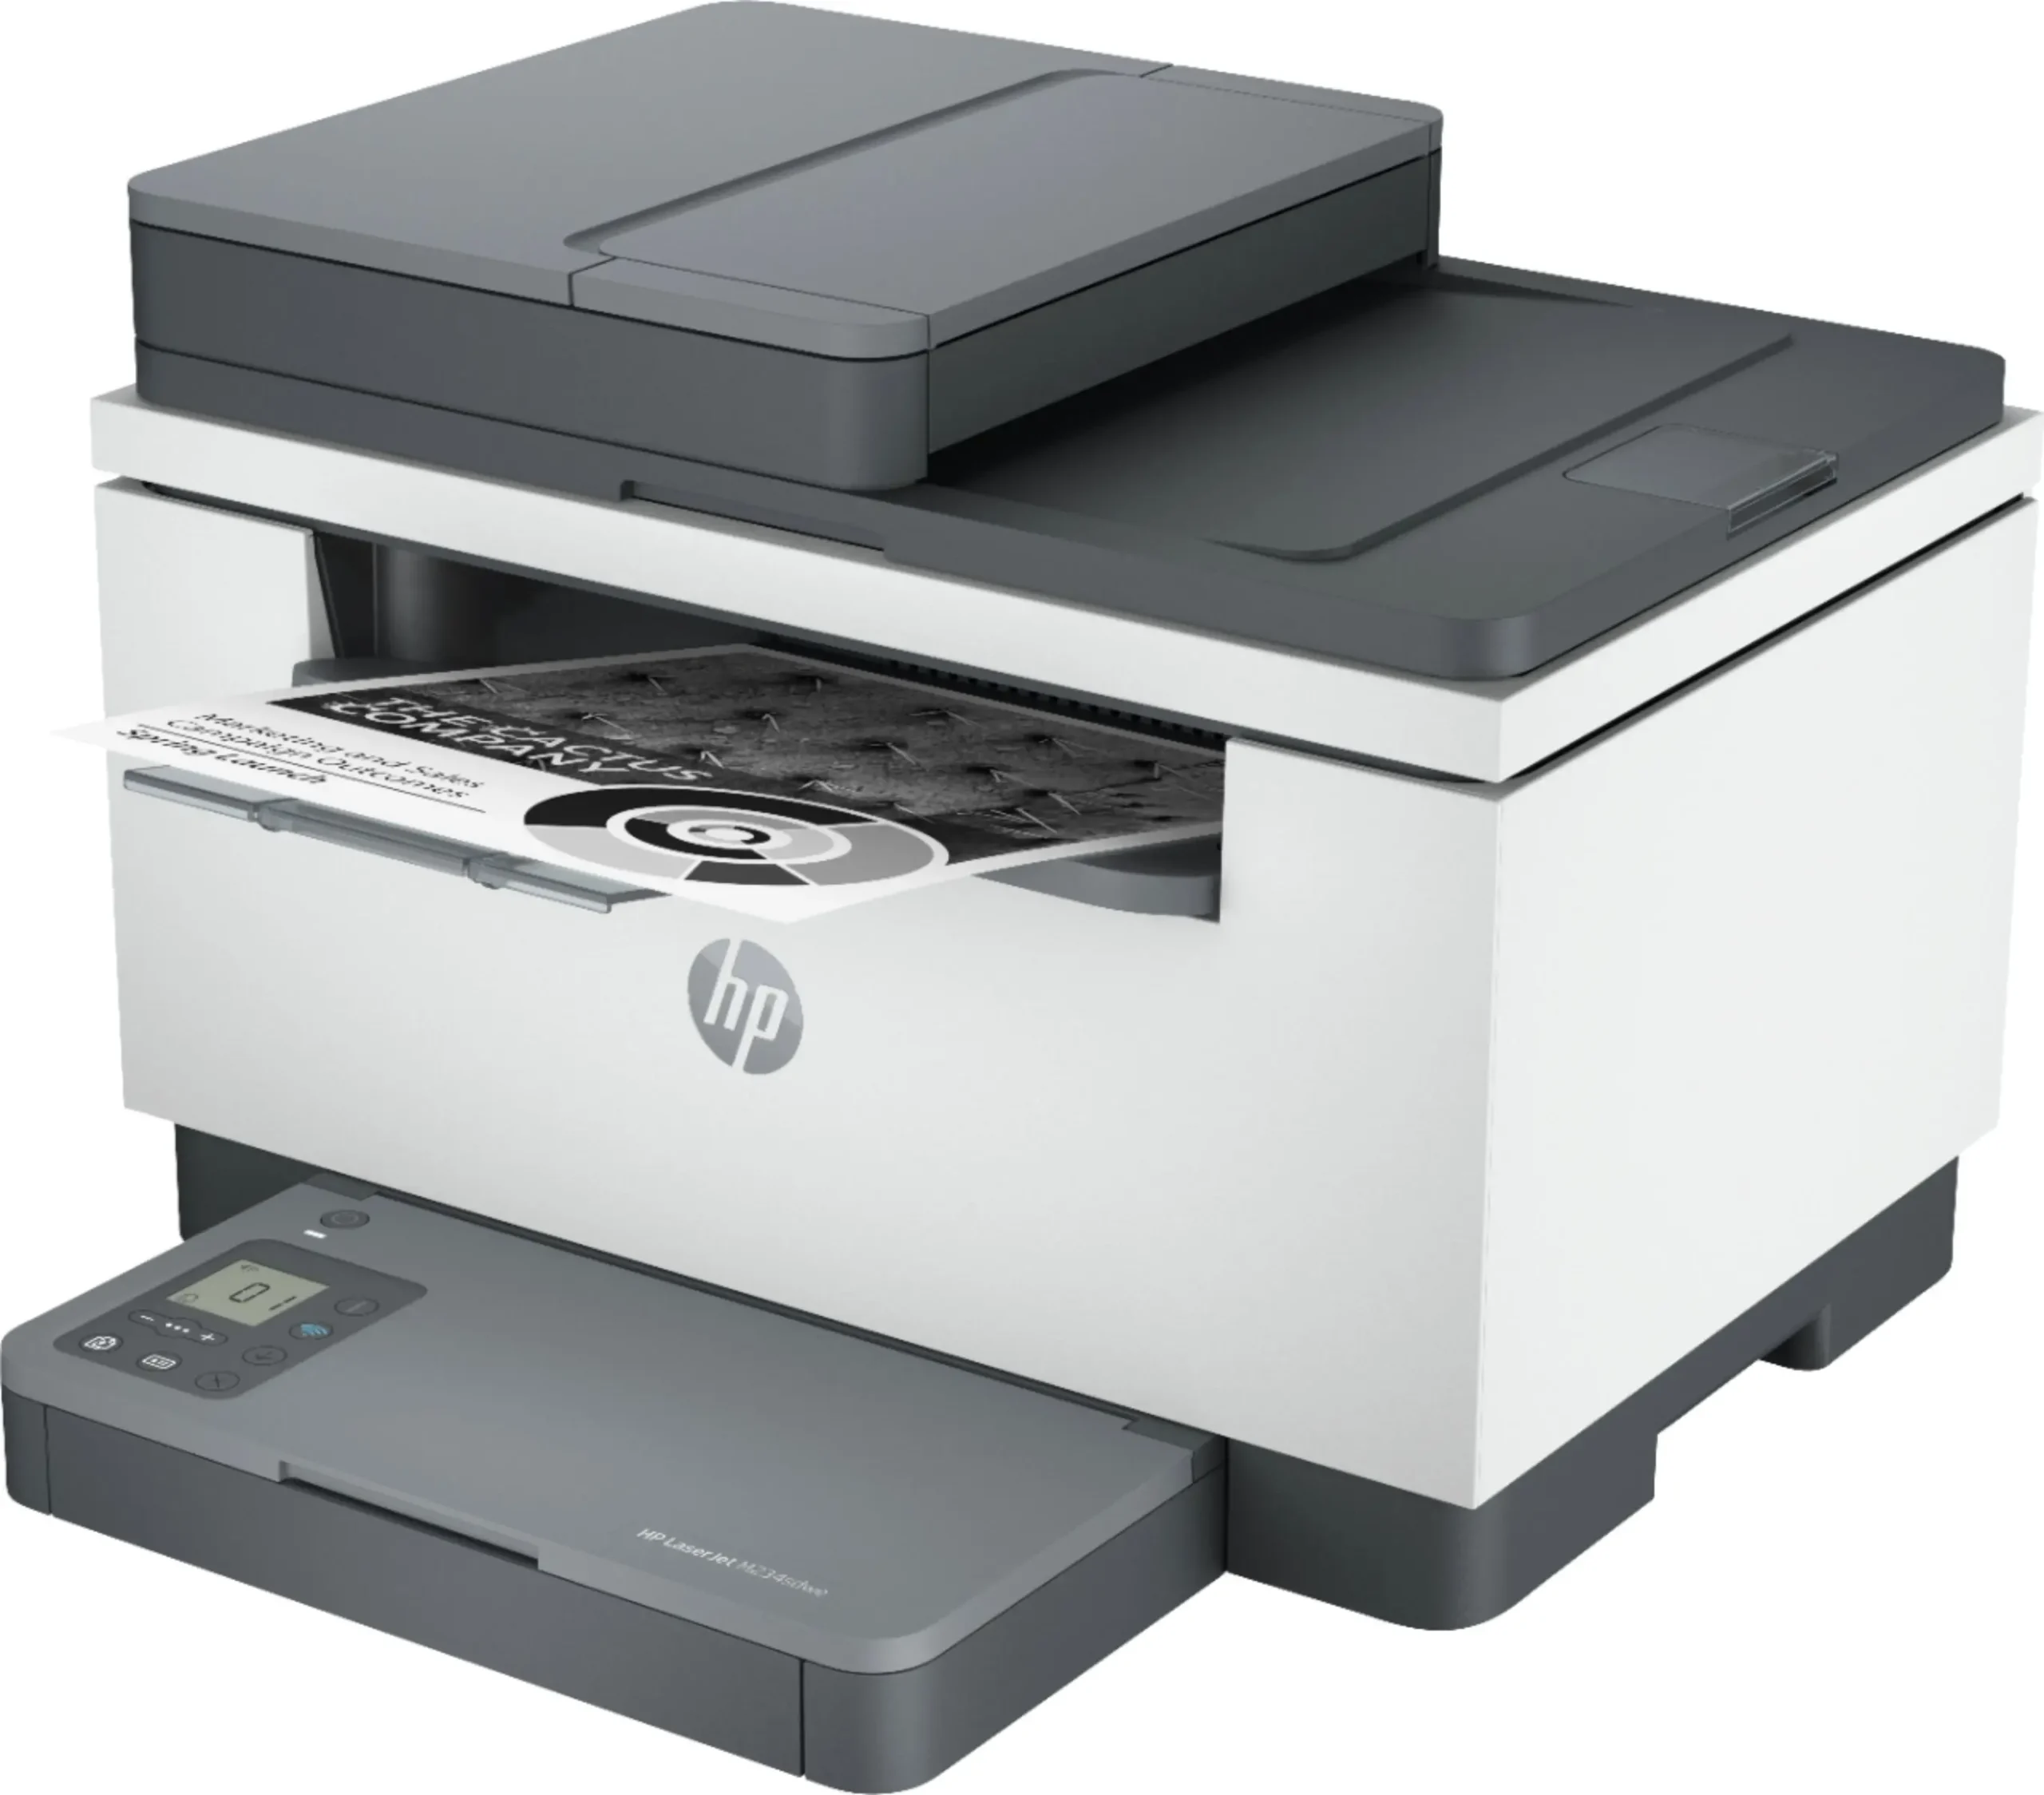 hewlett packard laserjet all-in-one compact - What is the smallest all-in-one printer in the world